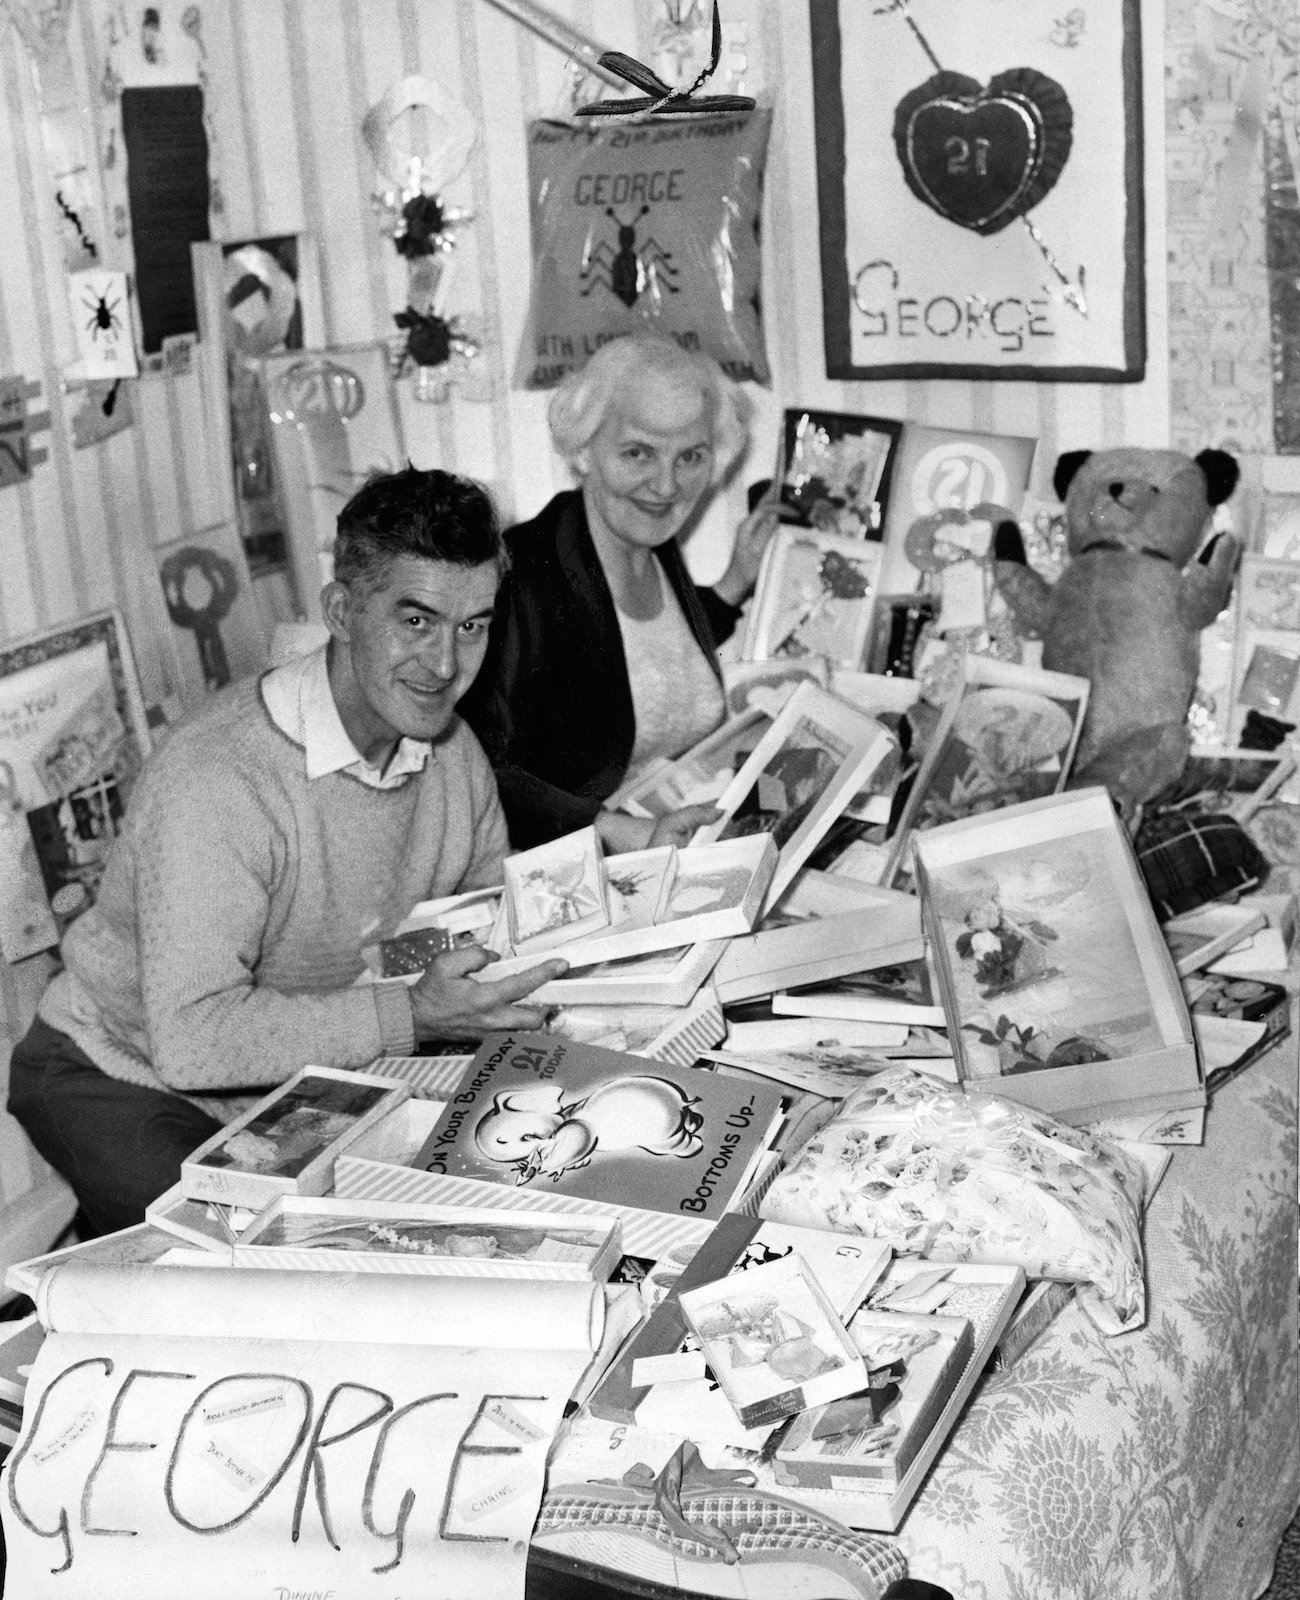 George Harrison's parents, Louise and Harold, sorting of fan mail for their son's 21st birthday in 1964.